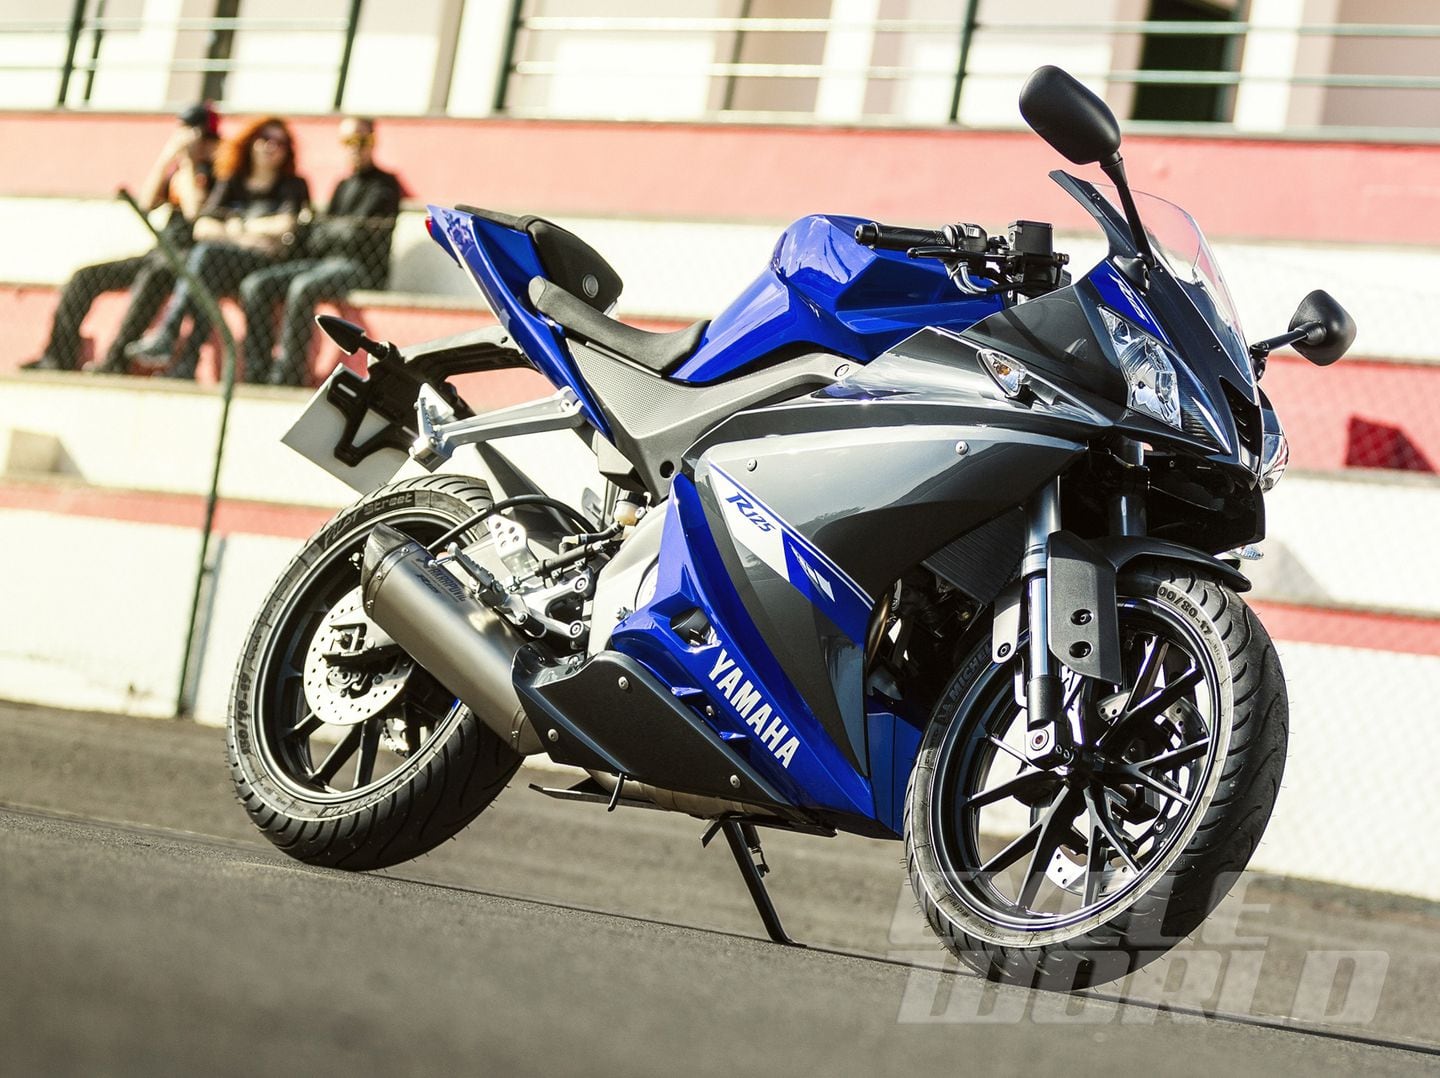 2014 Yamaha YZF-R125- Sportbike First Look Review- Photos